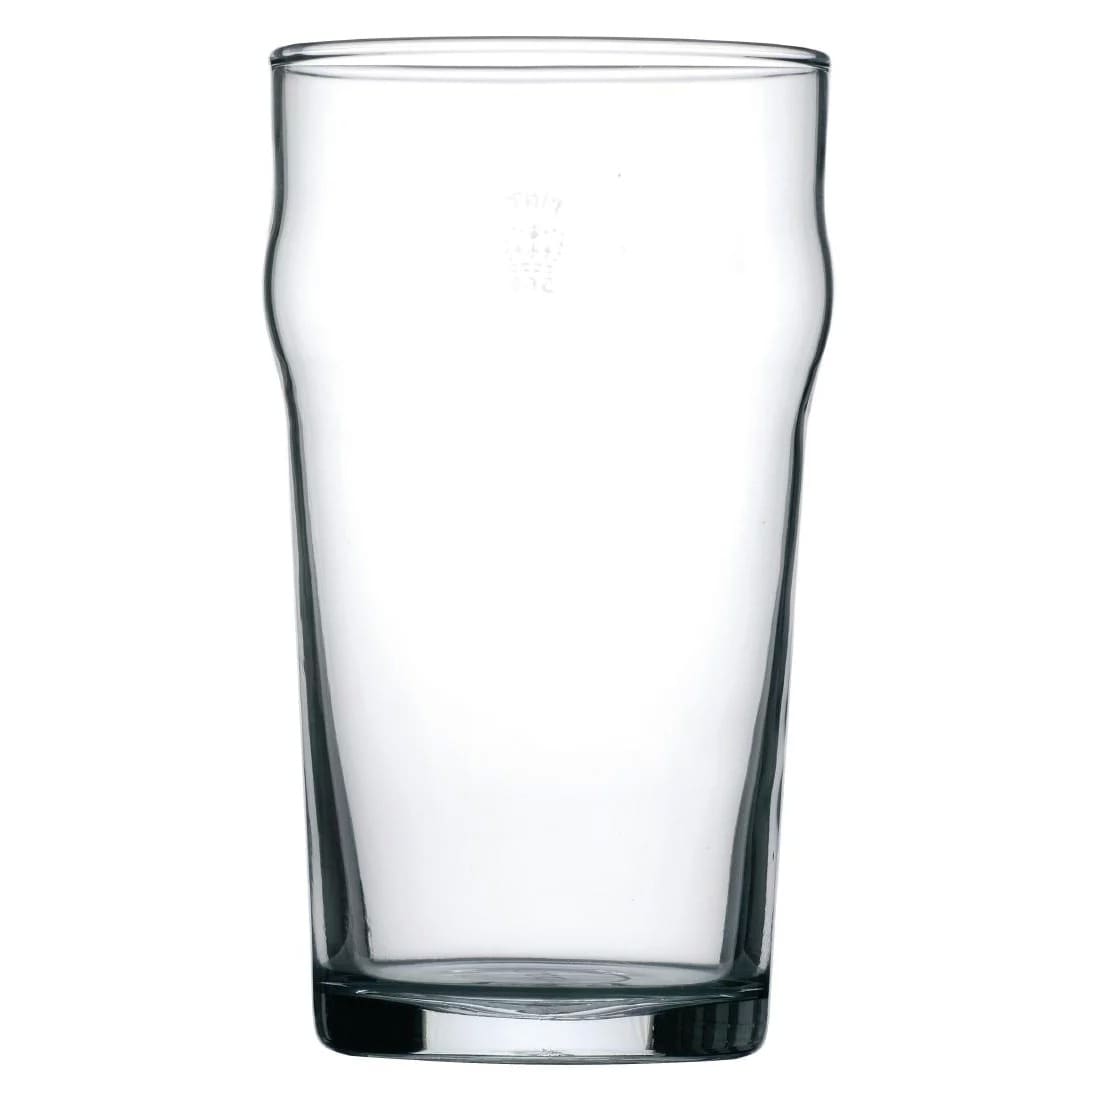 Details about   Arcoroc Nonic Nucleated Beer Glasses 560ml 